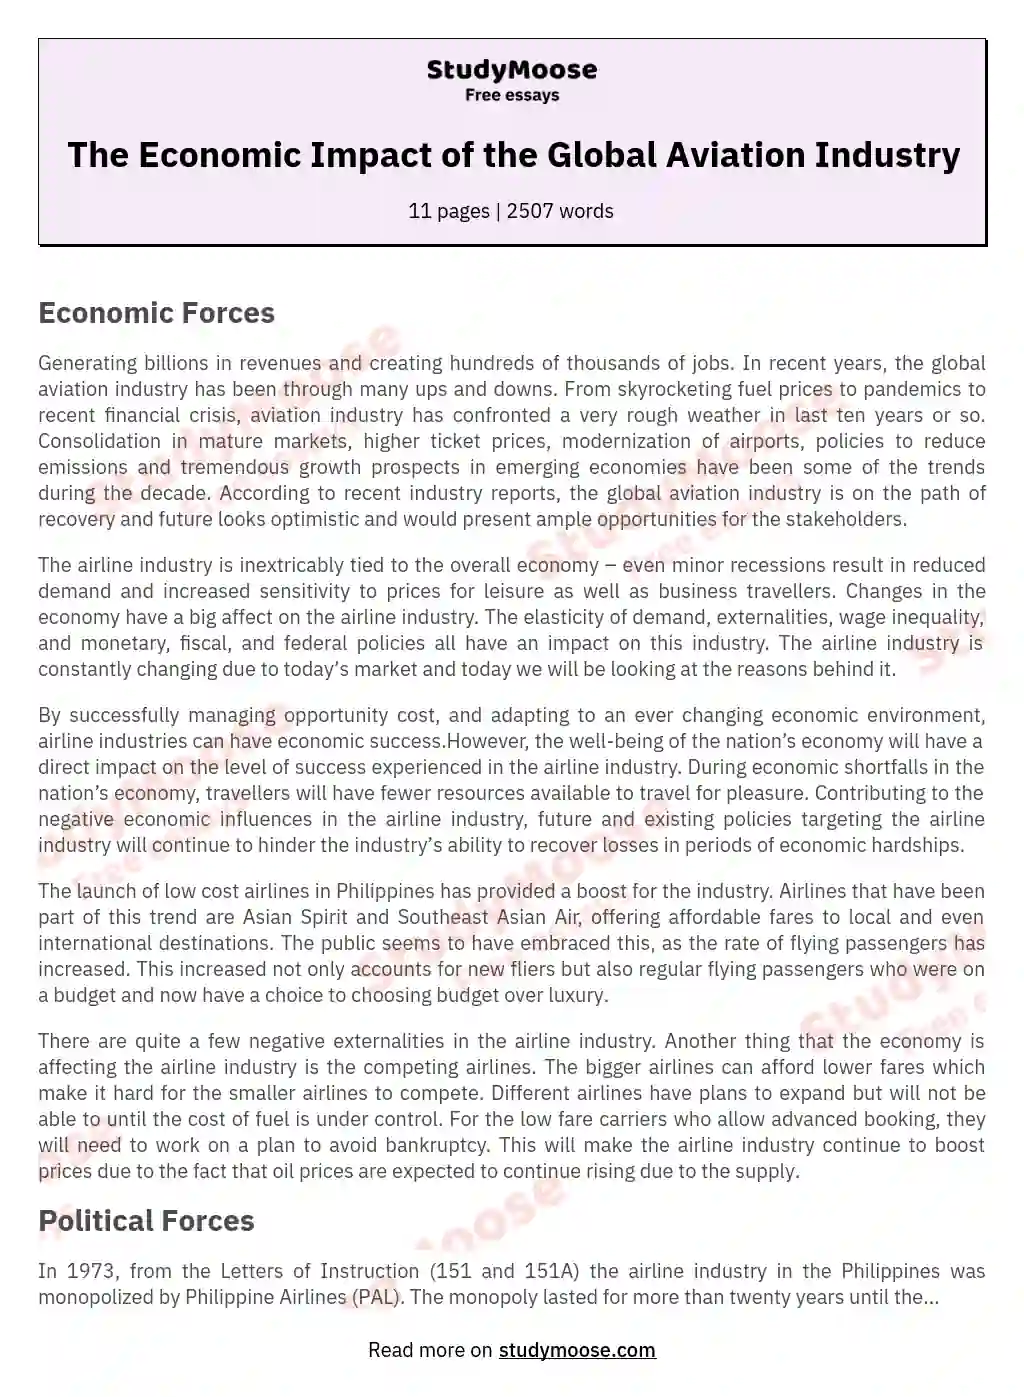 The Economic Impact of the Global Aviation Industry essay